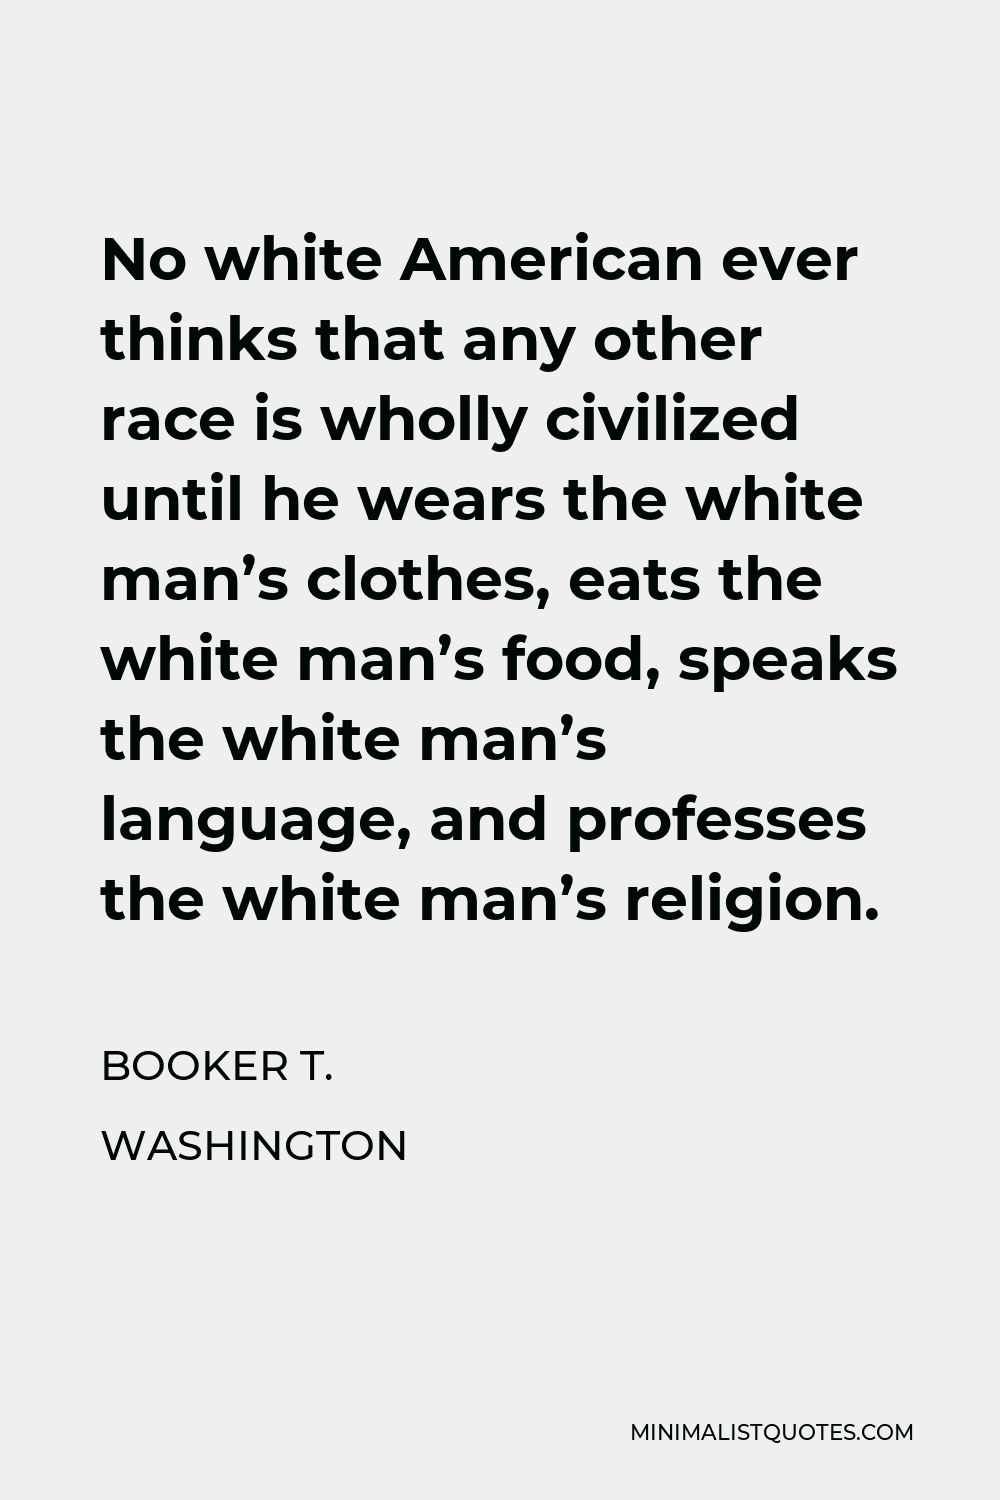 Booker T. Washington Quote - No white American ever thinks that any other race is wholly civilized until he wears the white man’s clothes, eats the white man’s food, speaks the white man’s language, and professes the white man’s religion.